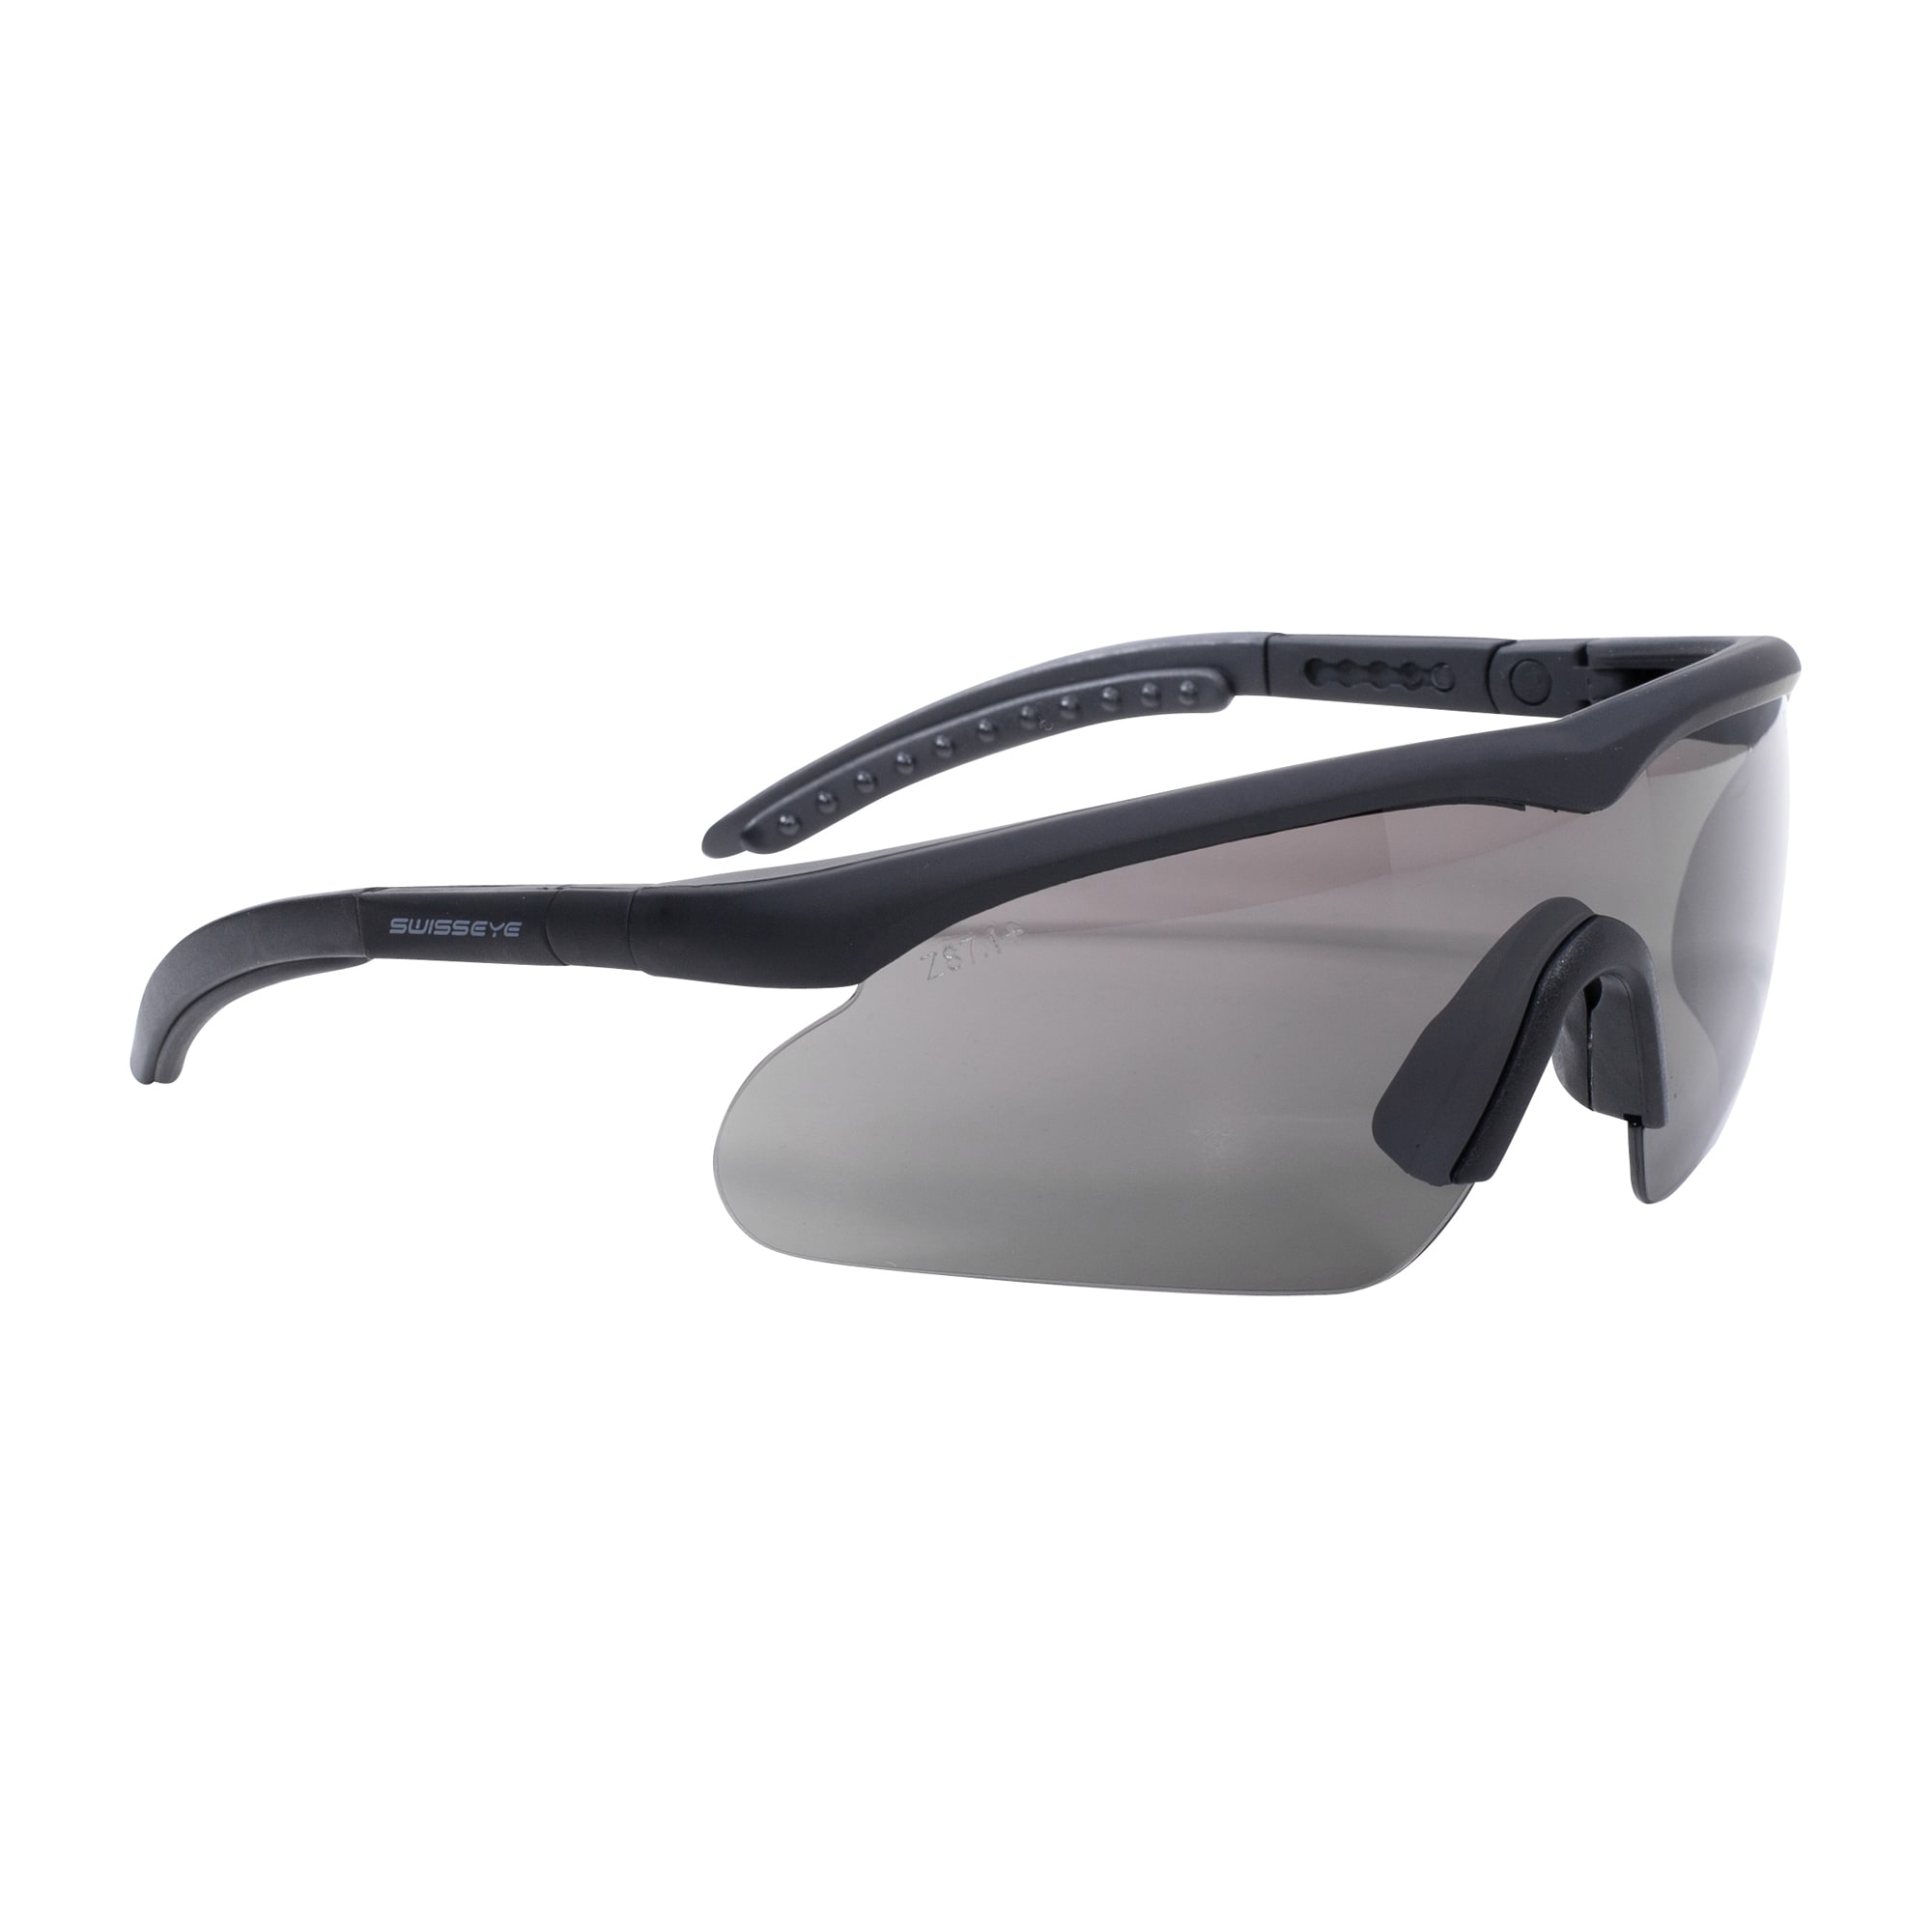 Purchase the Swiss Eye by ASMC Glasses Safety Raptor black